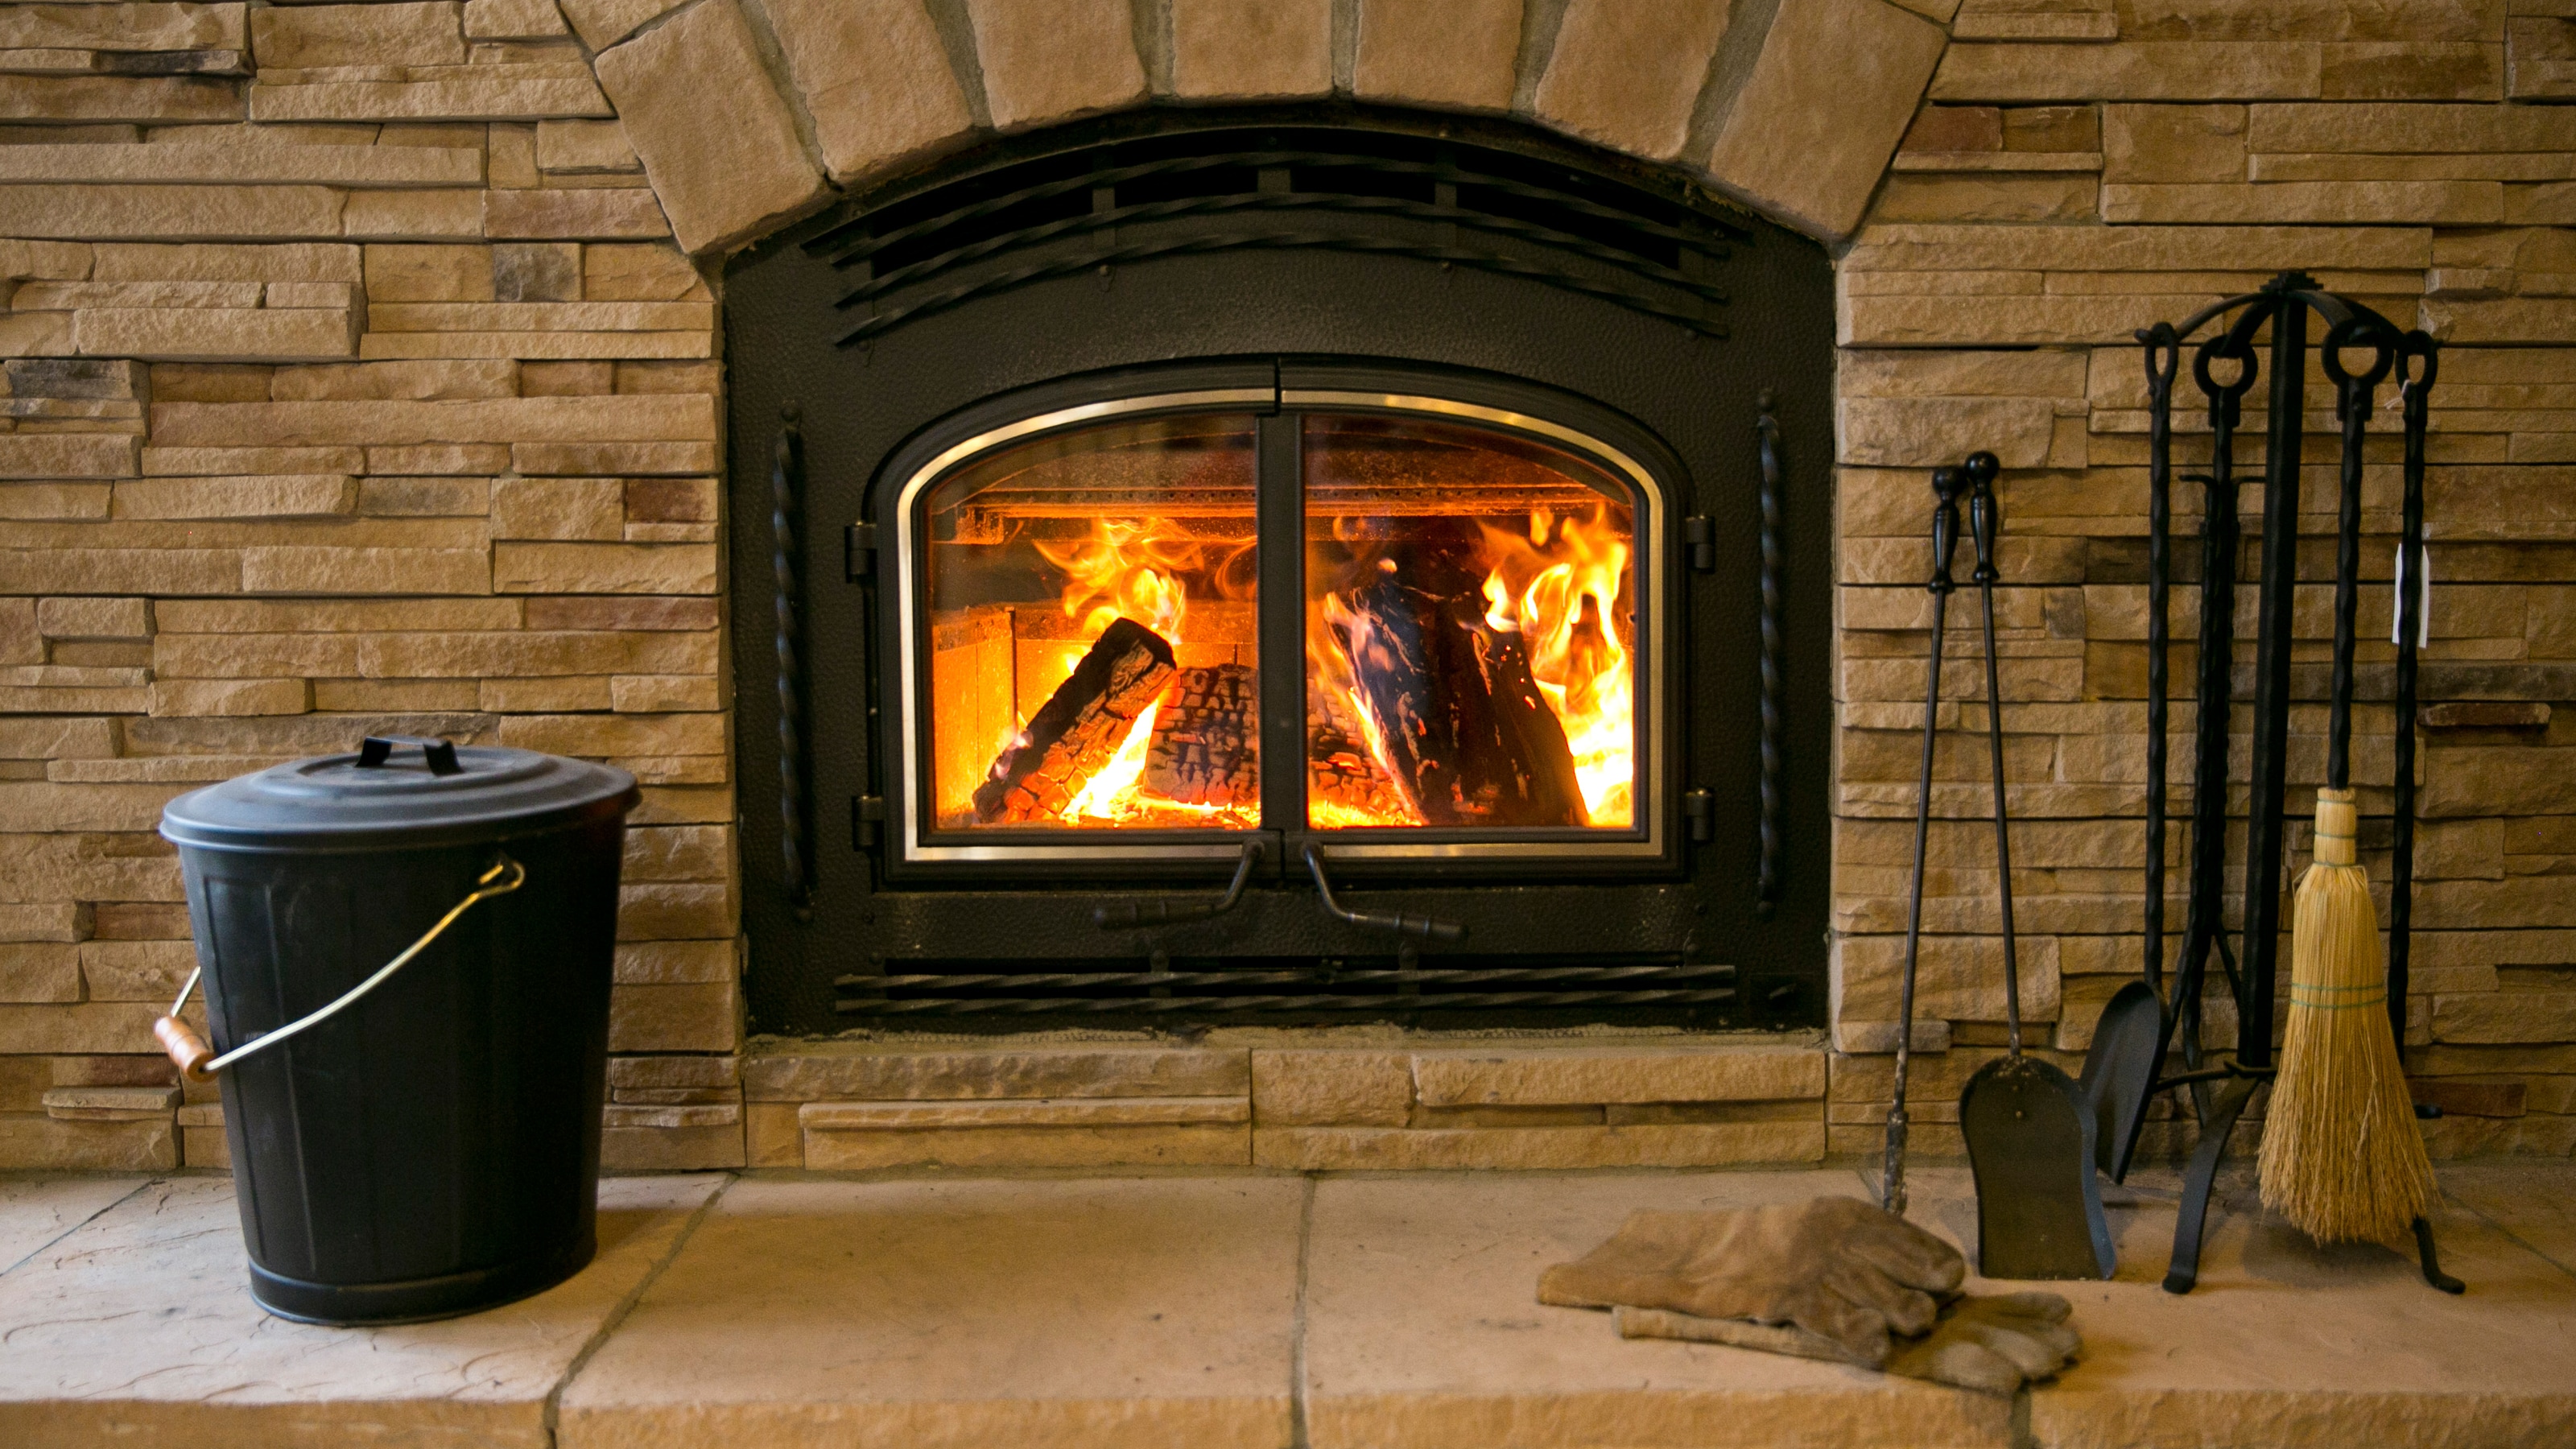 Fireplace Repair Las Vegas New How to Convert A Gas Fireplace to Wood Burning